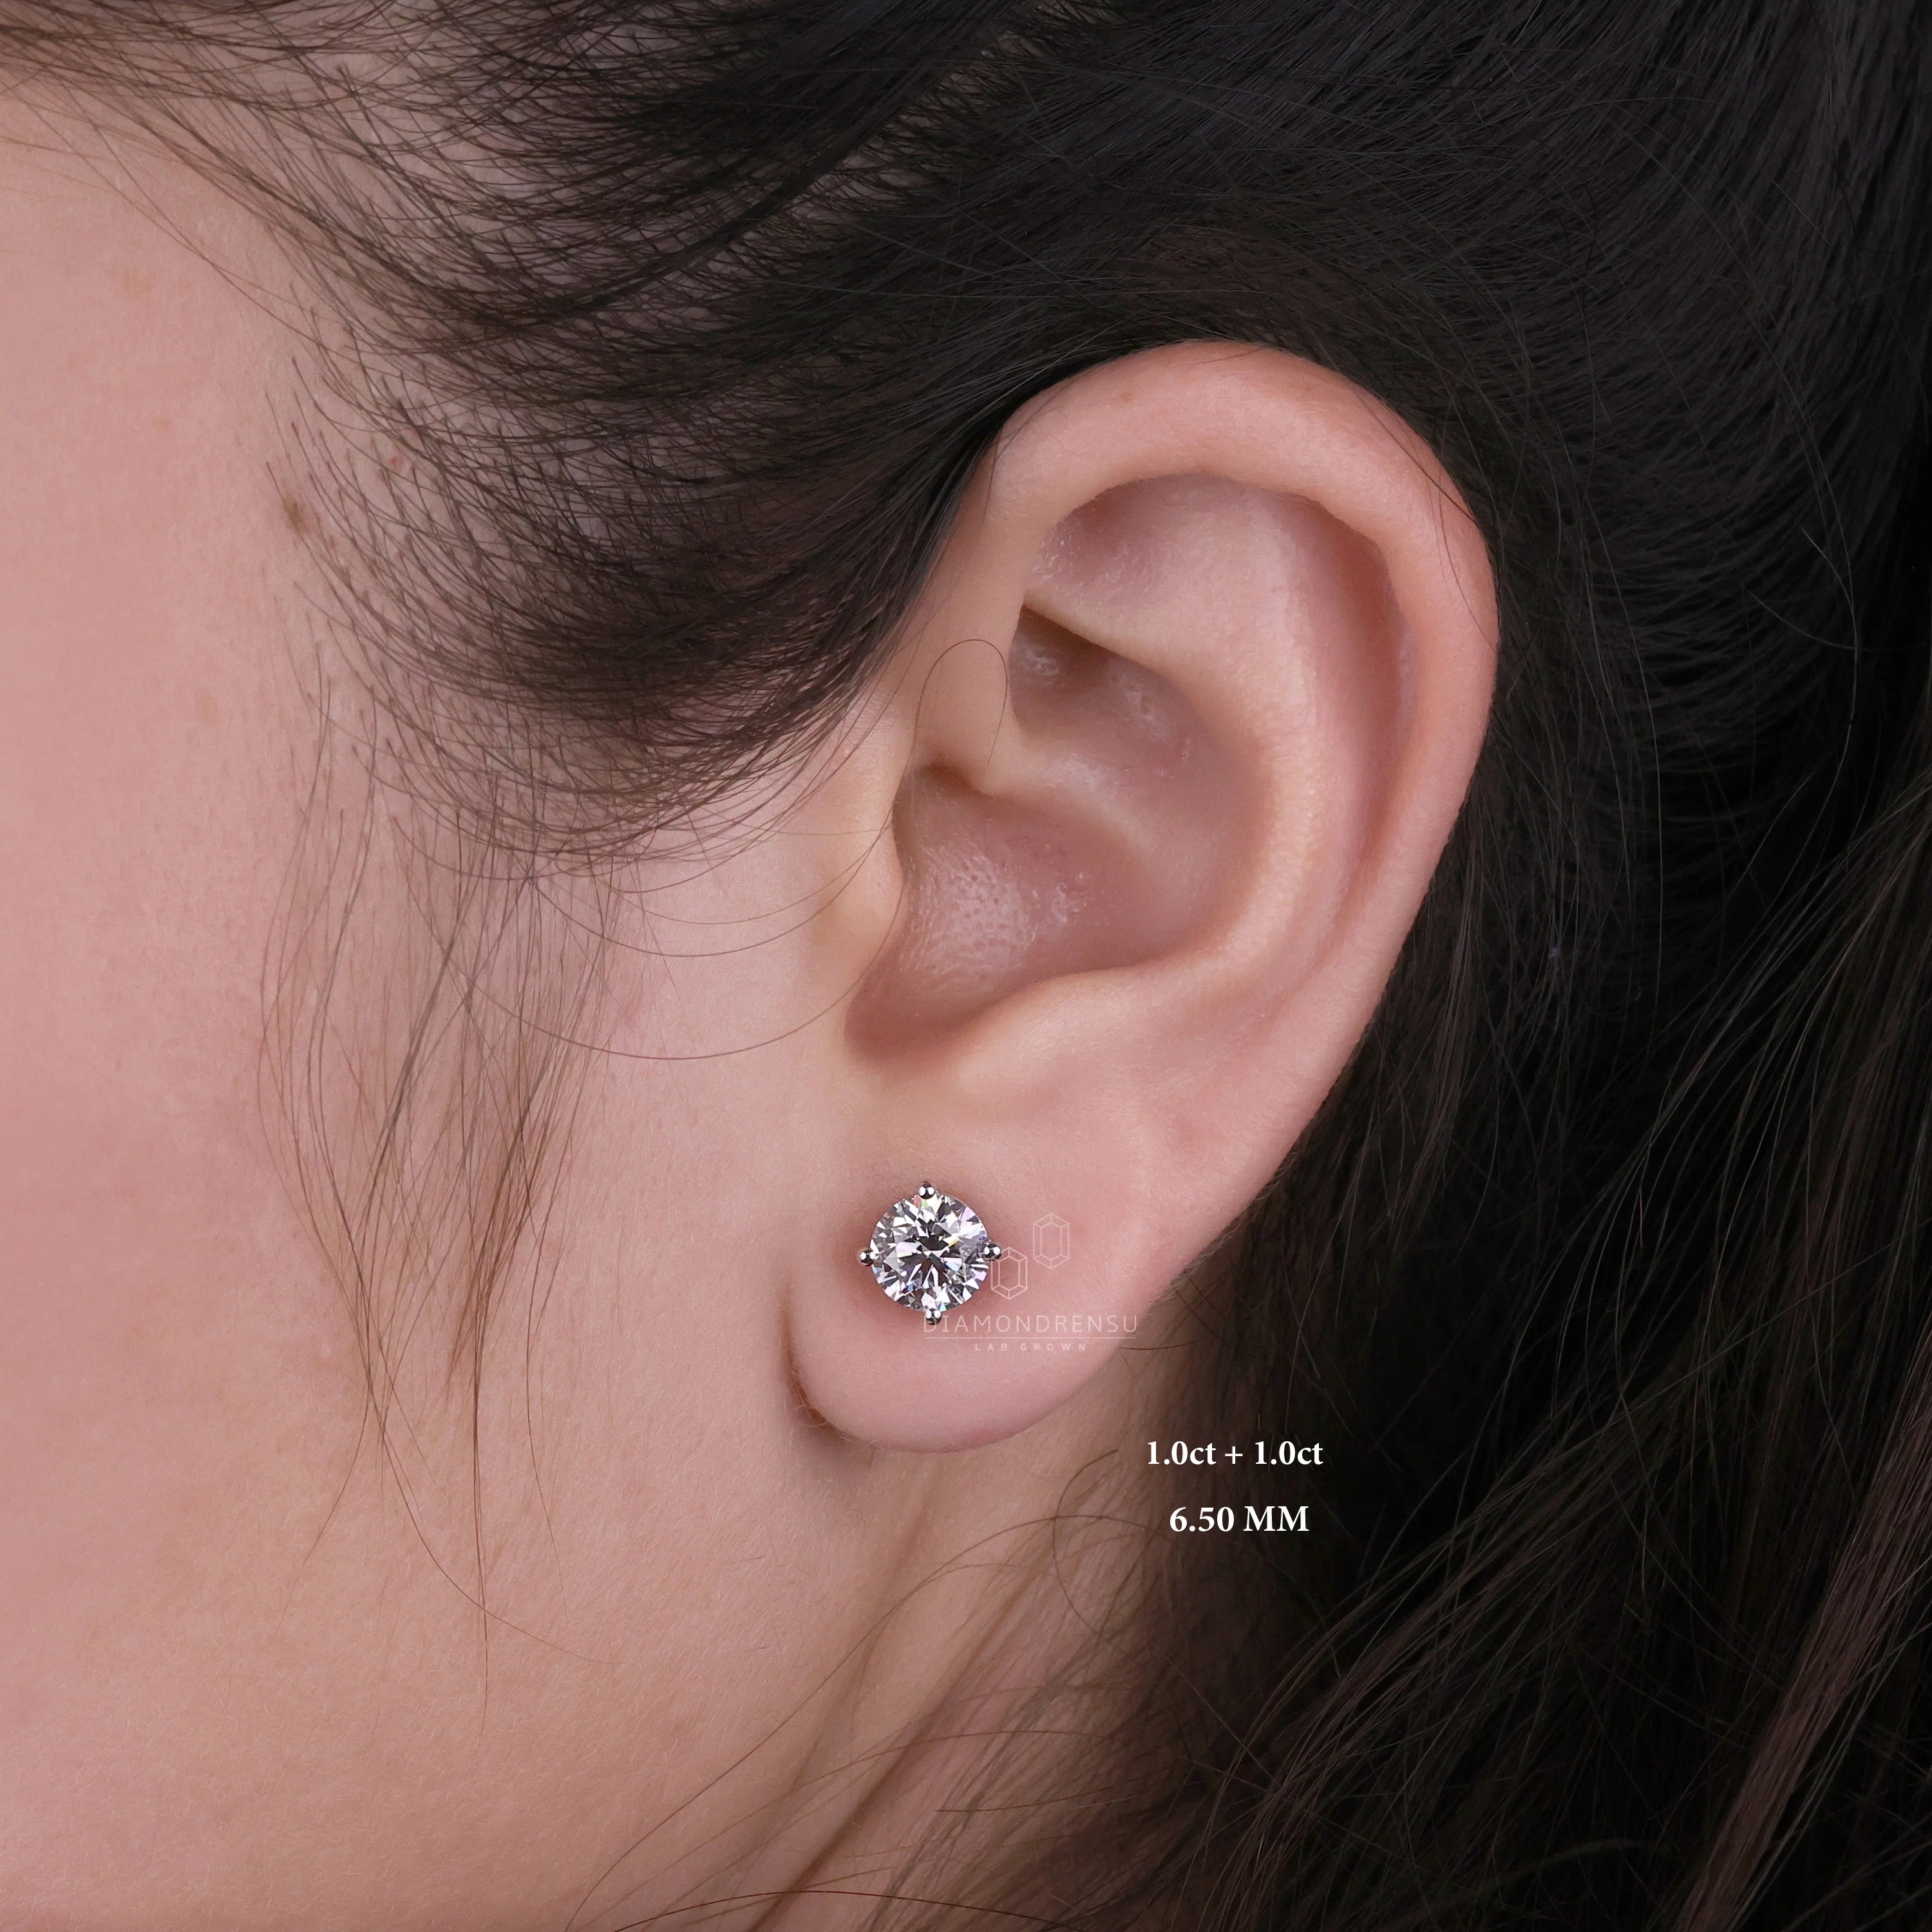 Gold stud earrings on an ear model, captured in a sunlit setting to enhance their warm glow.